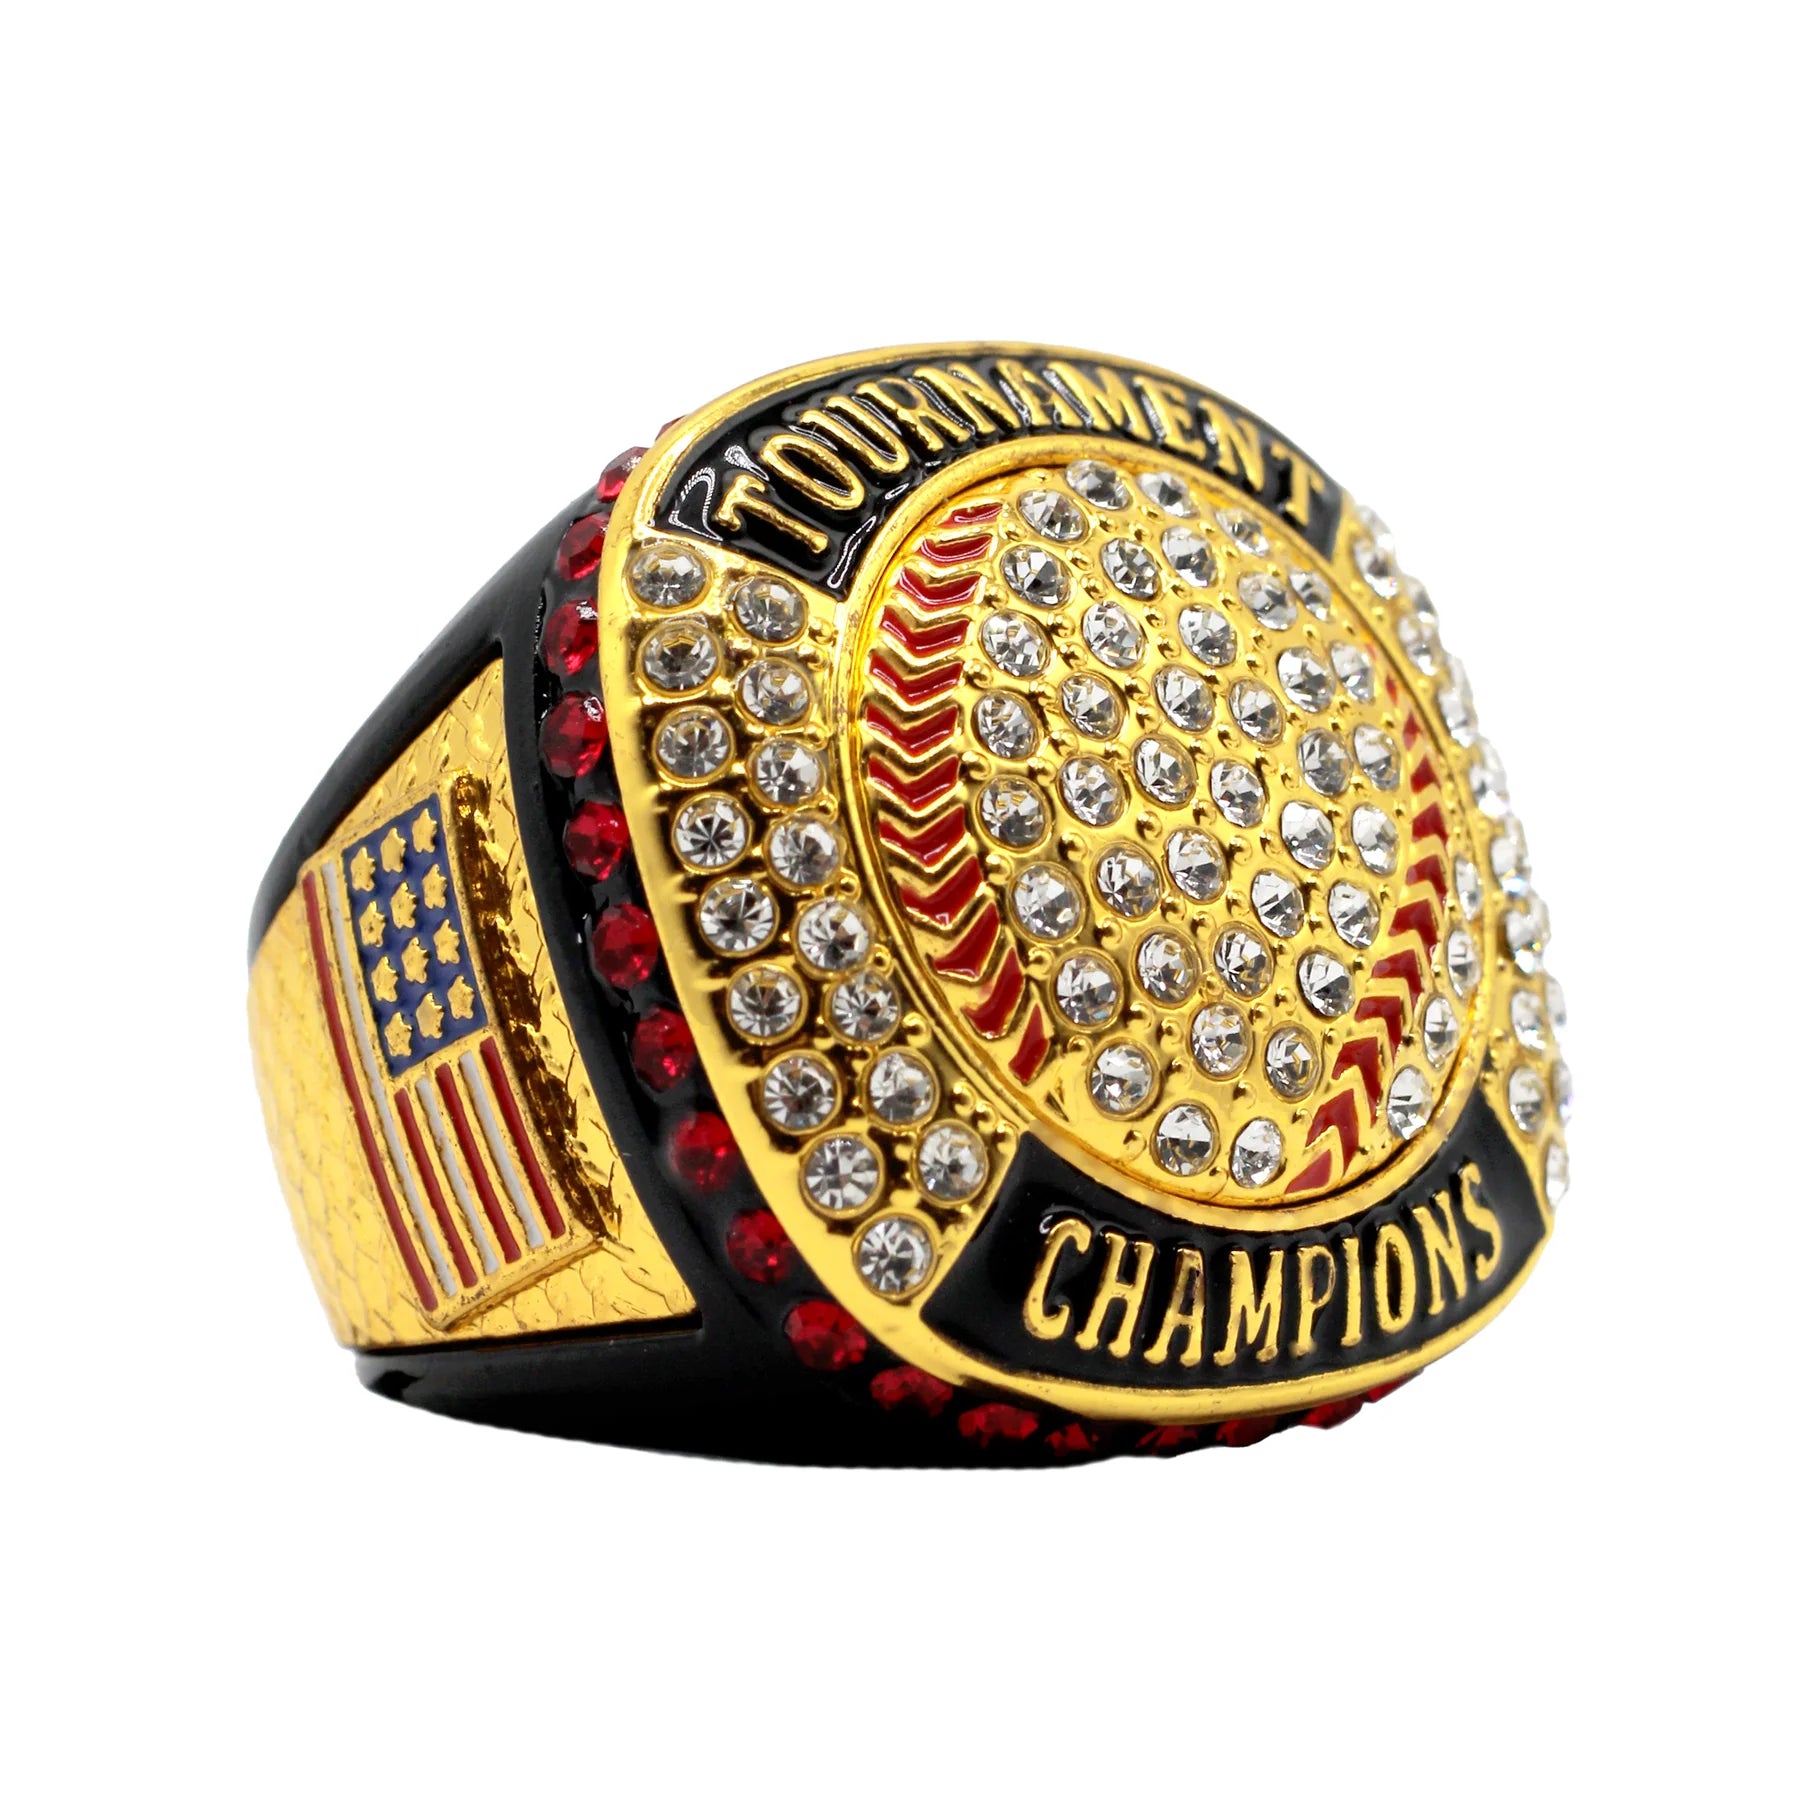 ALL GOLD TOURNAMENT CHAMPIONS RING